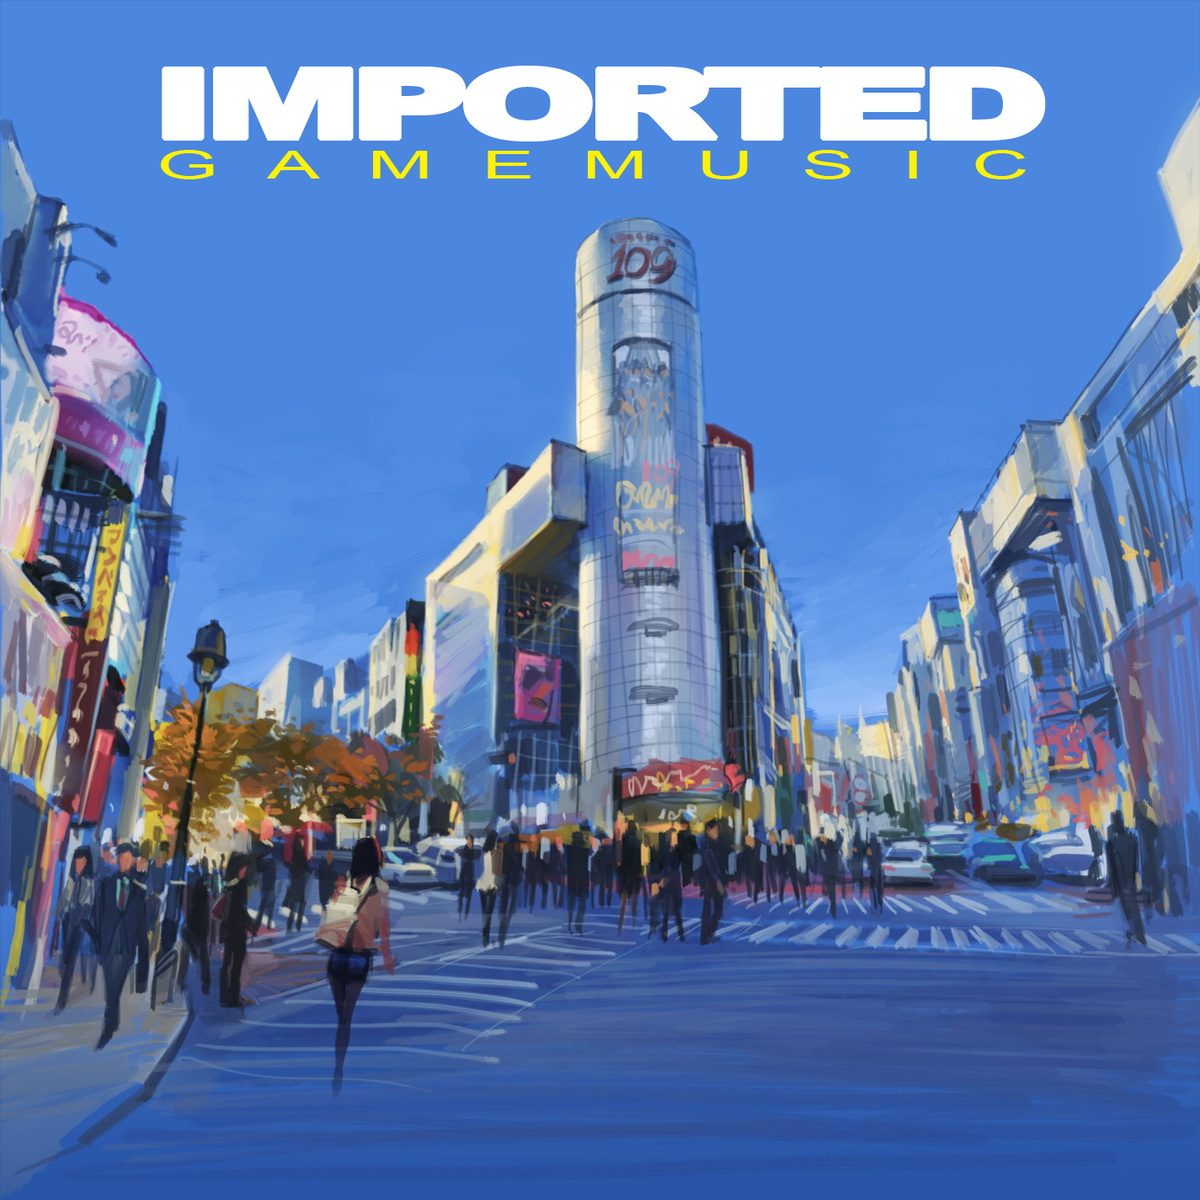 New Imported Game Music Album Features Stellar Composers Akira Ueda, Tenpei Sato, and More